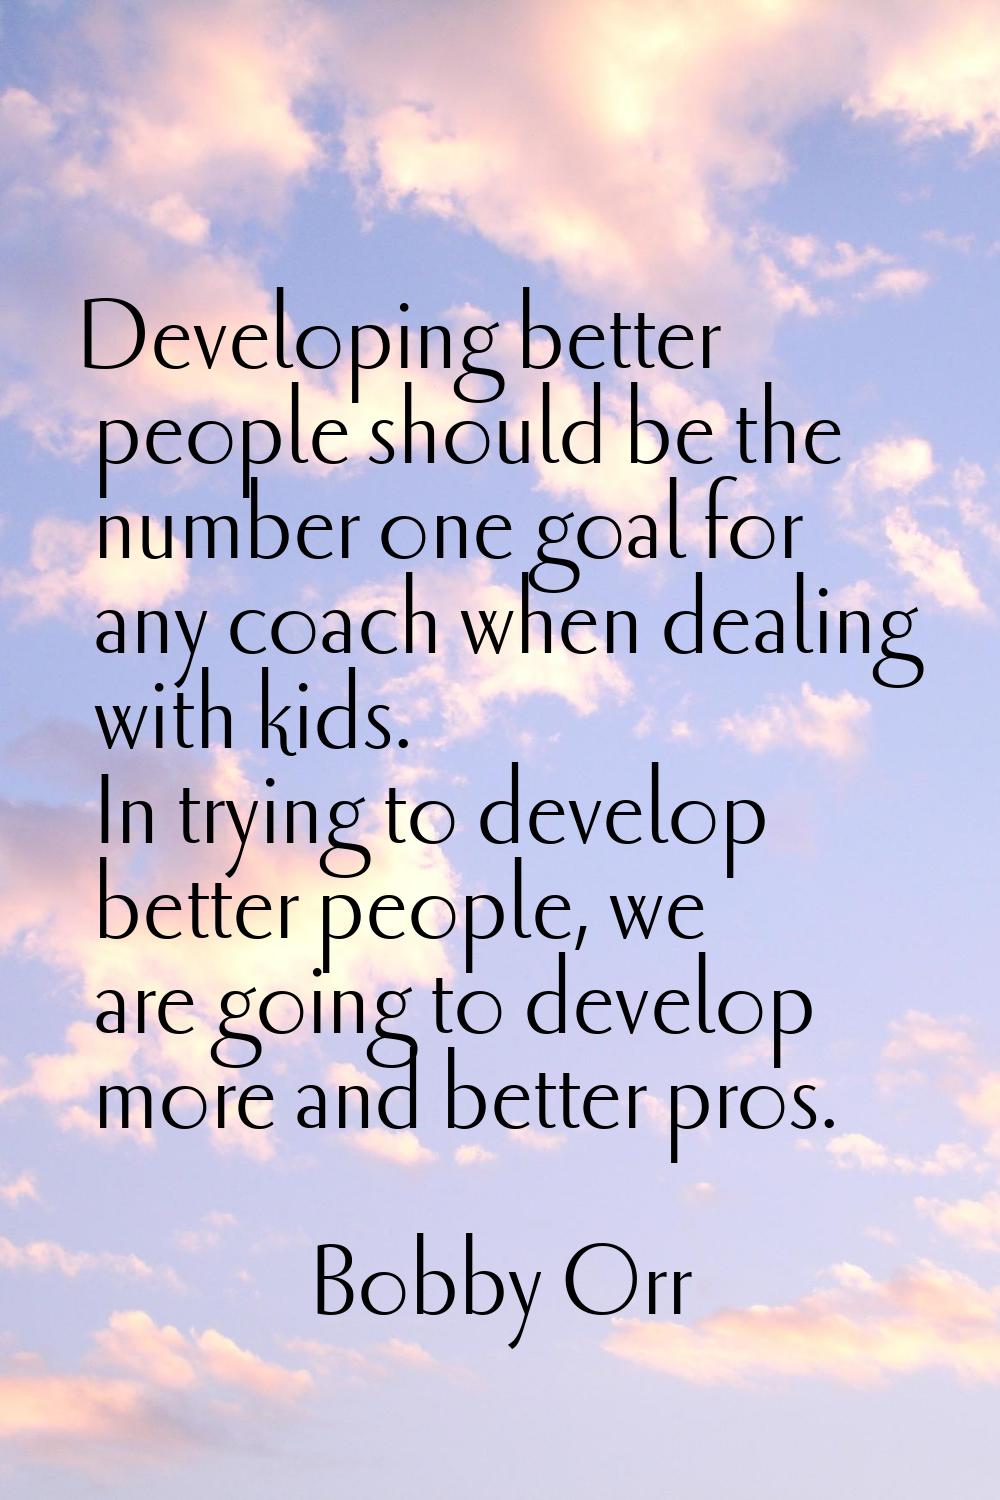 Developing better people should be the number one goal for any coach when dealing with kids. In try